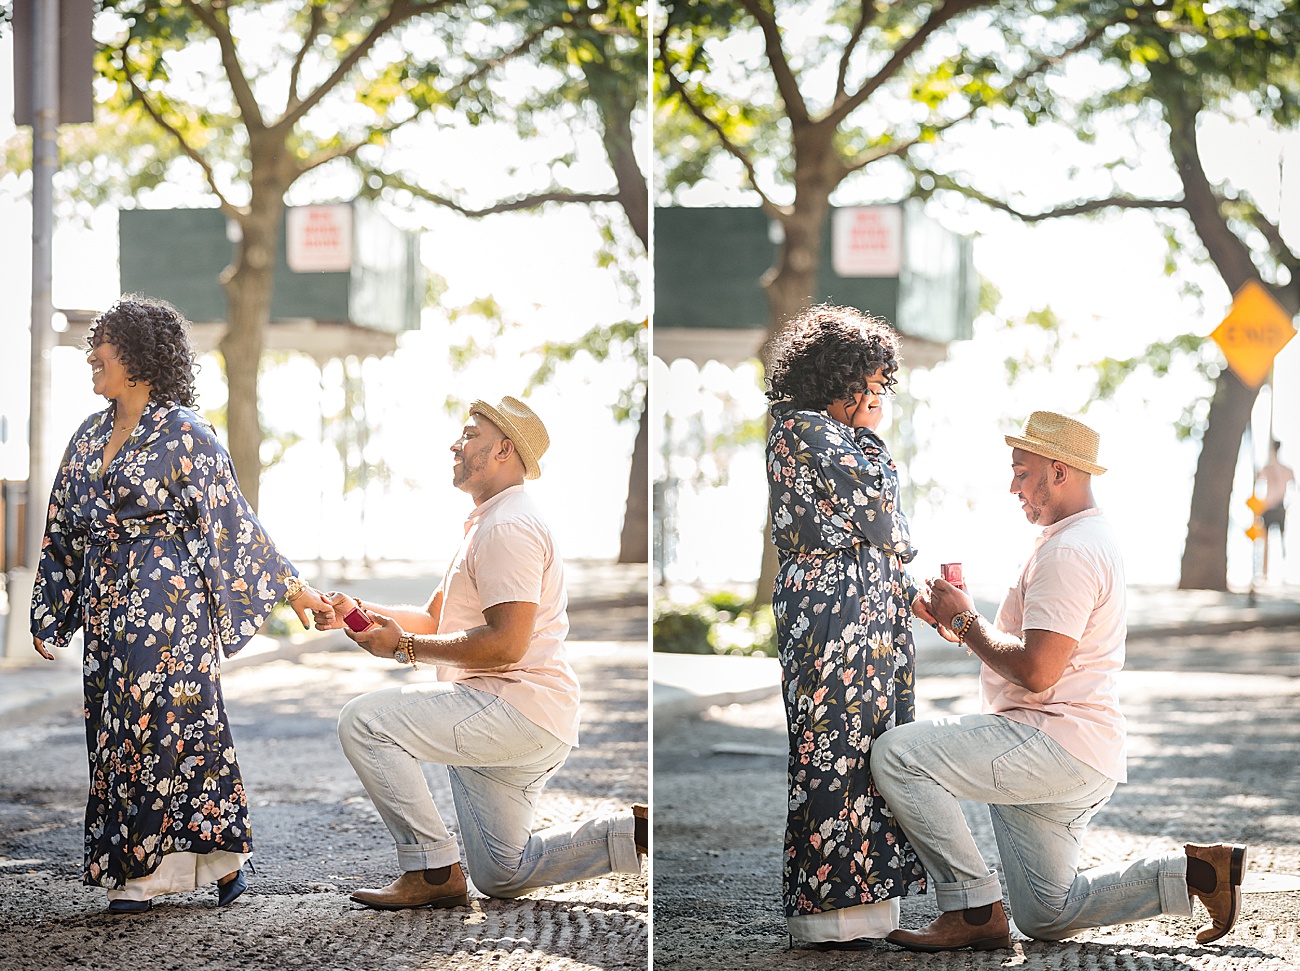 Brooklyn Bride Park Proposal in New York City by Jamerlyn Brown Photography